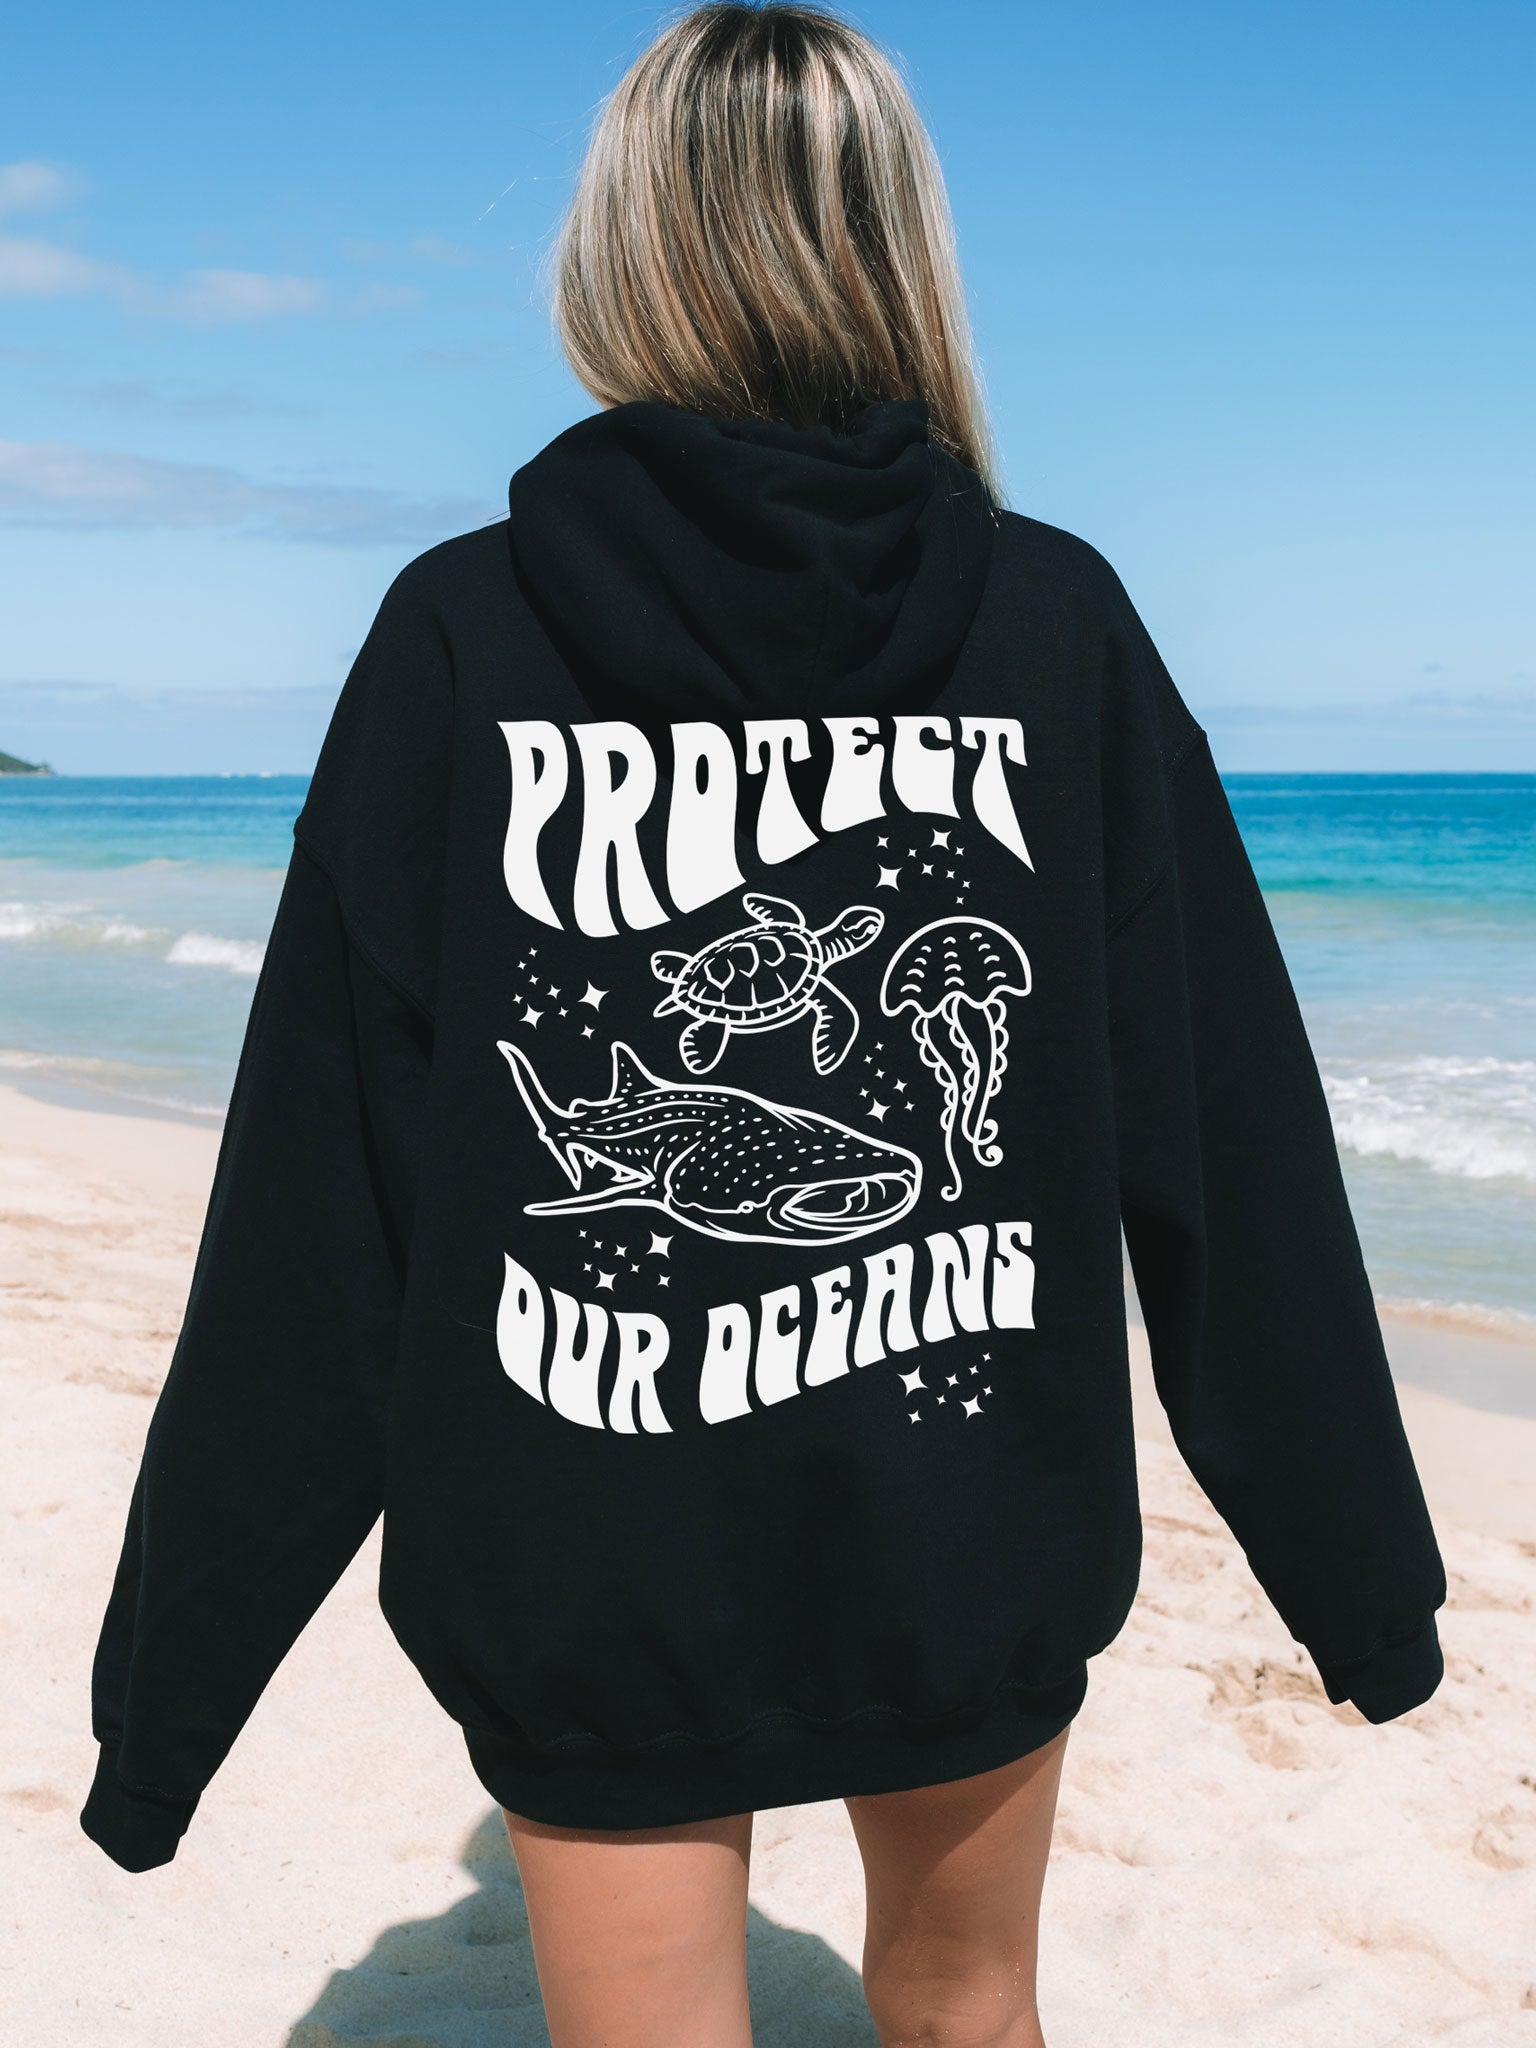 Protect Our Oceans Respect the Local Print Women Hoodie Long Sleeves  Sweatshirts Pocket Casual Female Cotton Top Trend Clothes